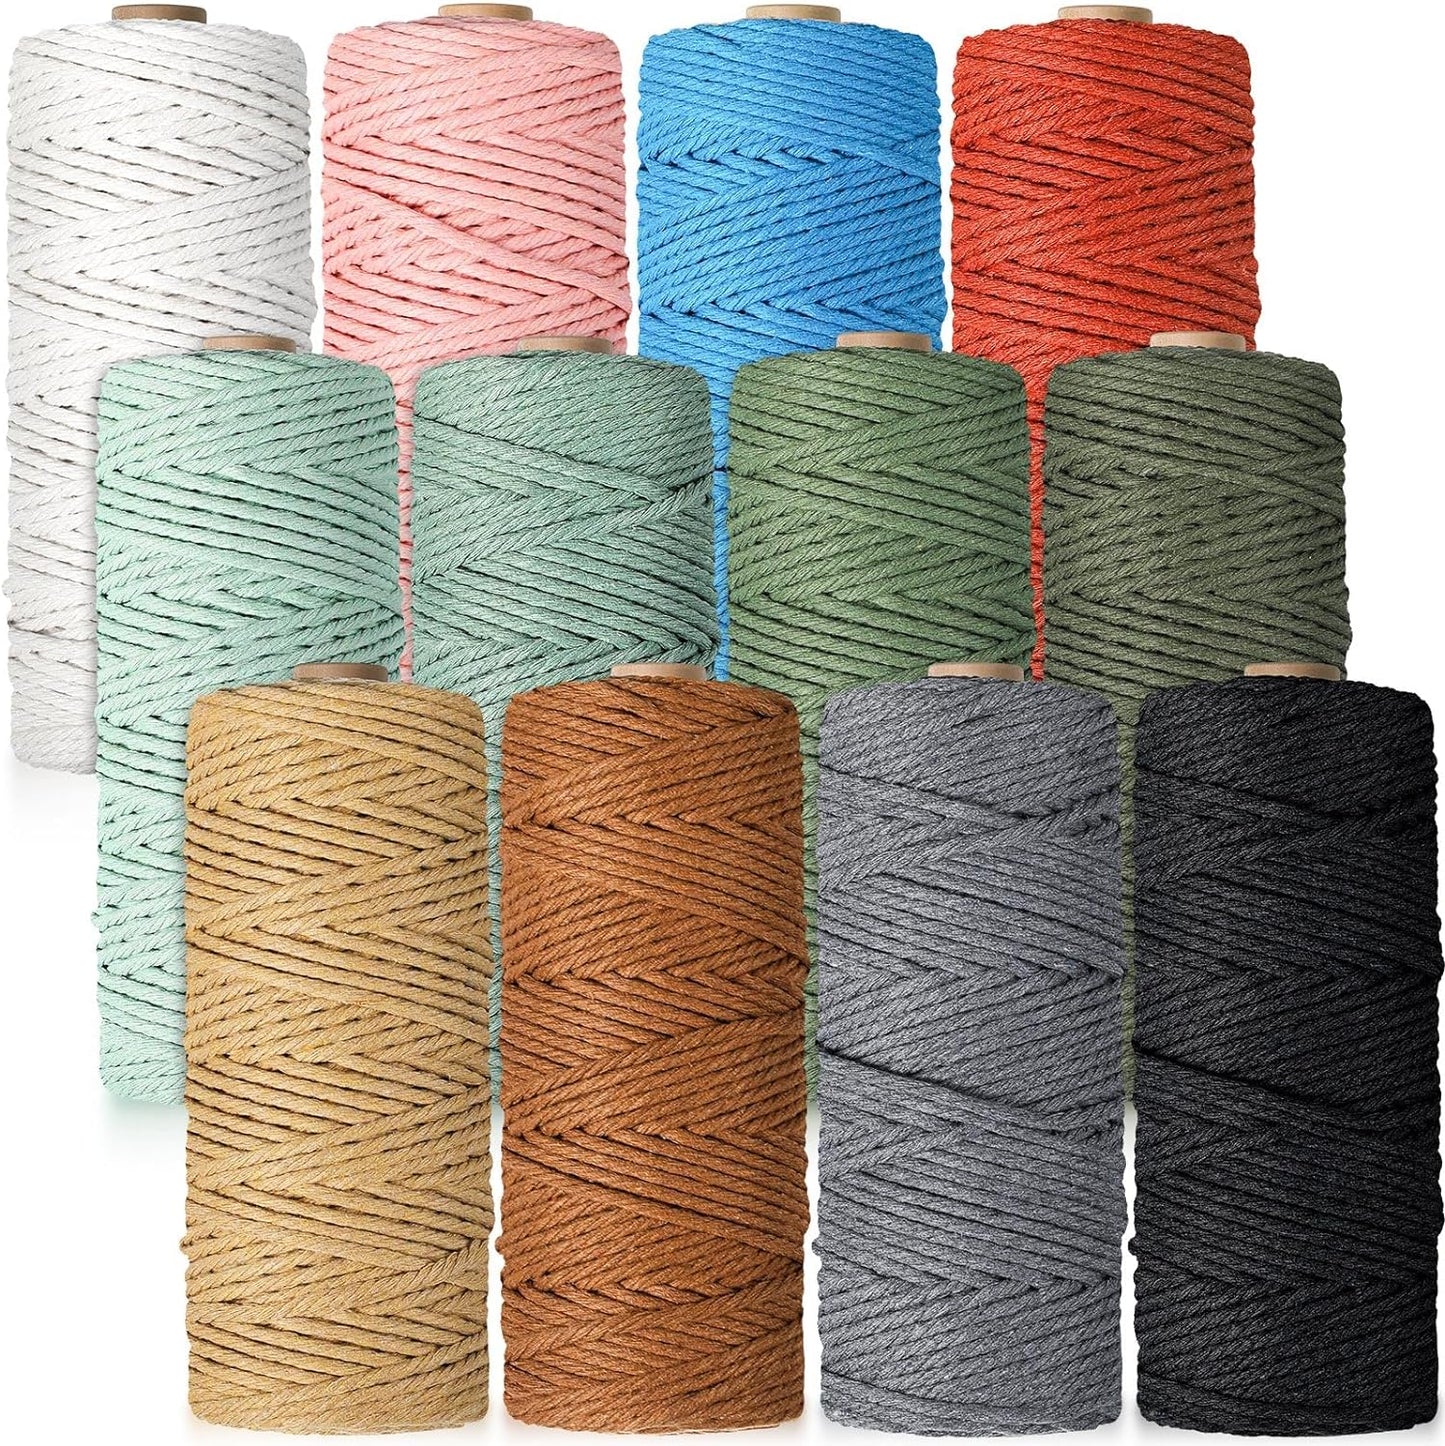 12 Rolls Macrame Cord, 3 Mm X 1308 Yards Natural Cotton Twine, Colored Macrame String, Colorful Cotton Rope for DIY Crafts Knitting, Artworks, Wall Hanging, Plant Hangers (Classic Color)